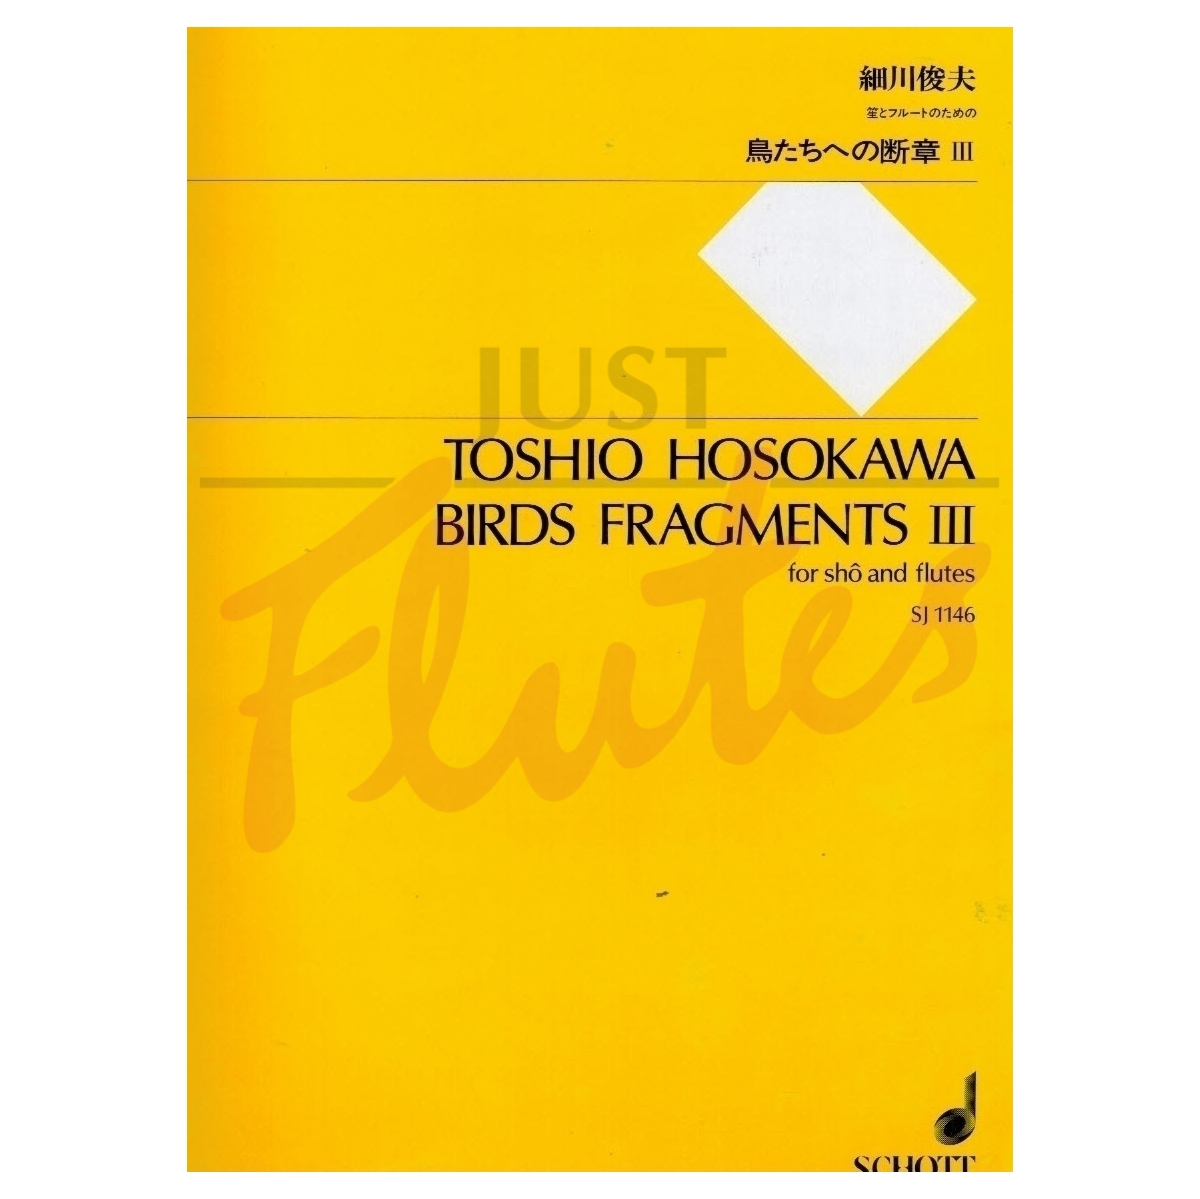 Birds Fragments III for sho and flutes (bass and piccolo)